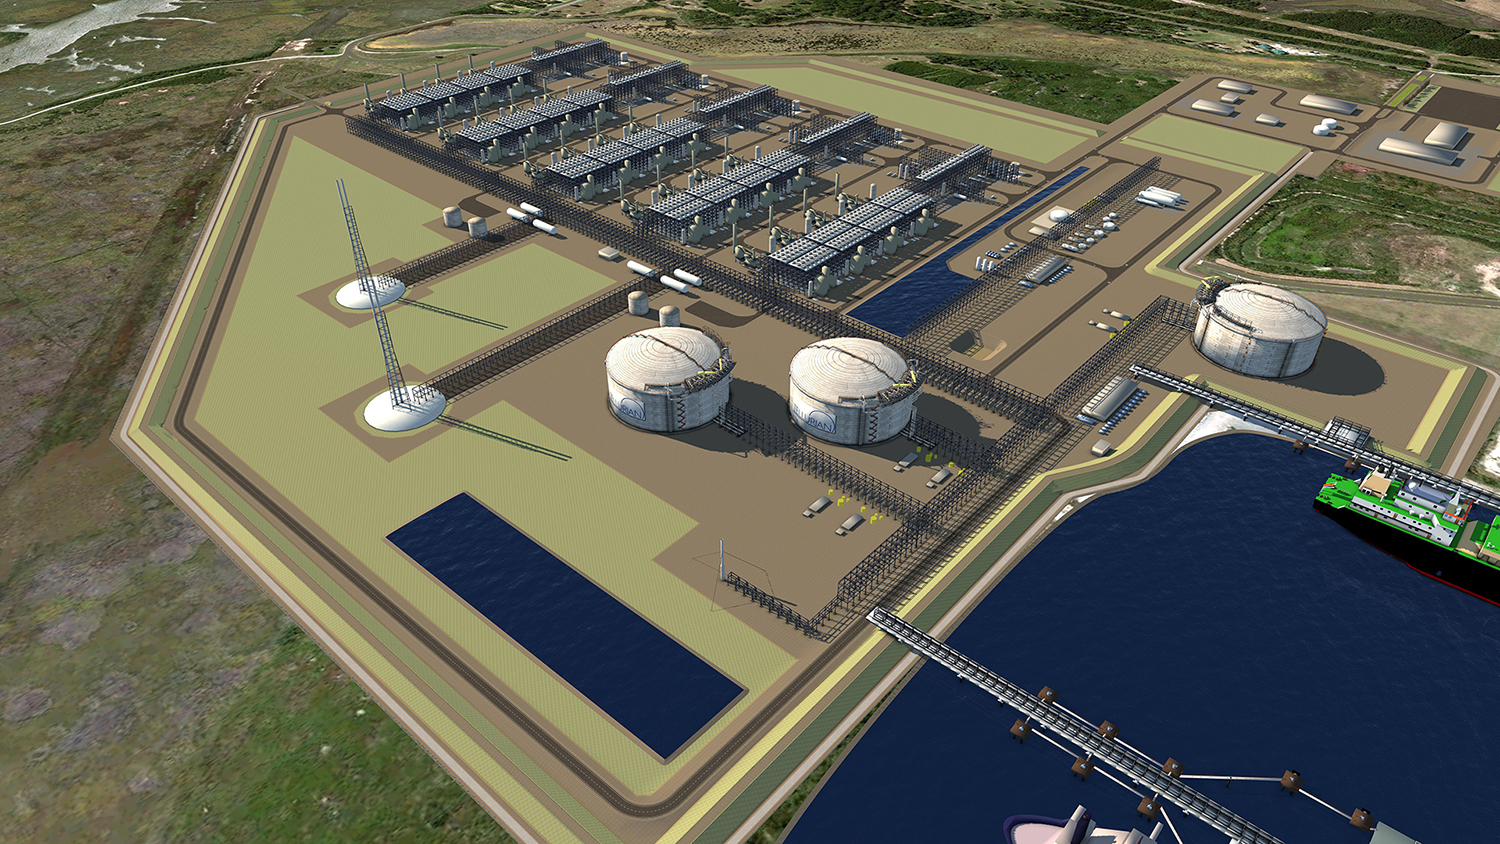 Tellurian's Driftwood LNG wins non-FTA export approval from DOE